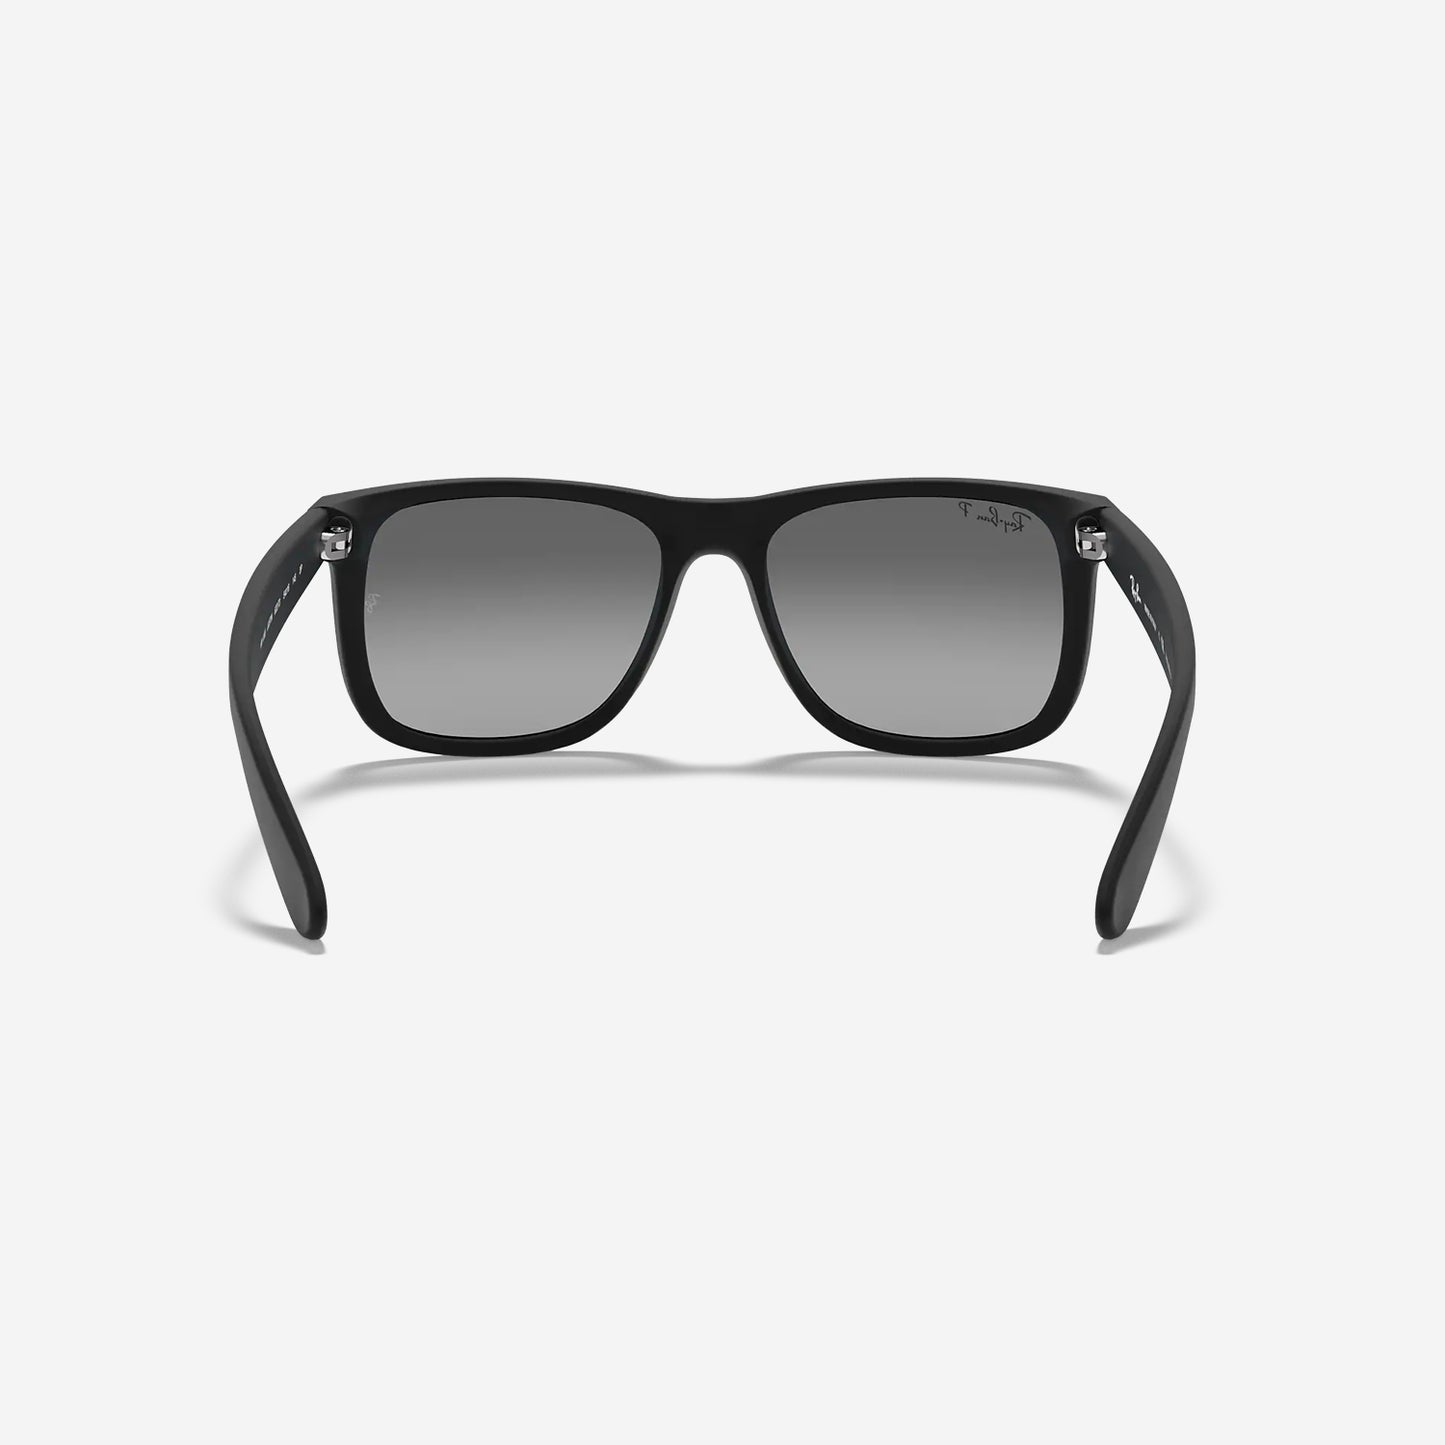 Ray-Ban - Justin Classic RB4165 - Rubber Matte Black Frame / Polarized Grey Gradient Lens - 55